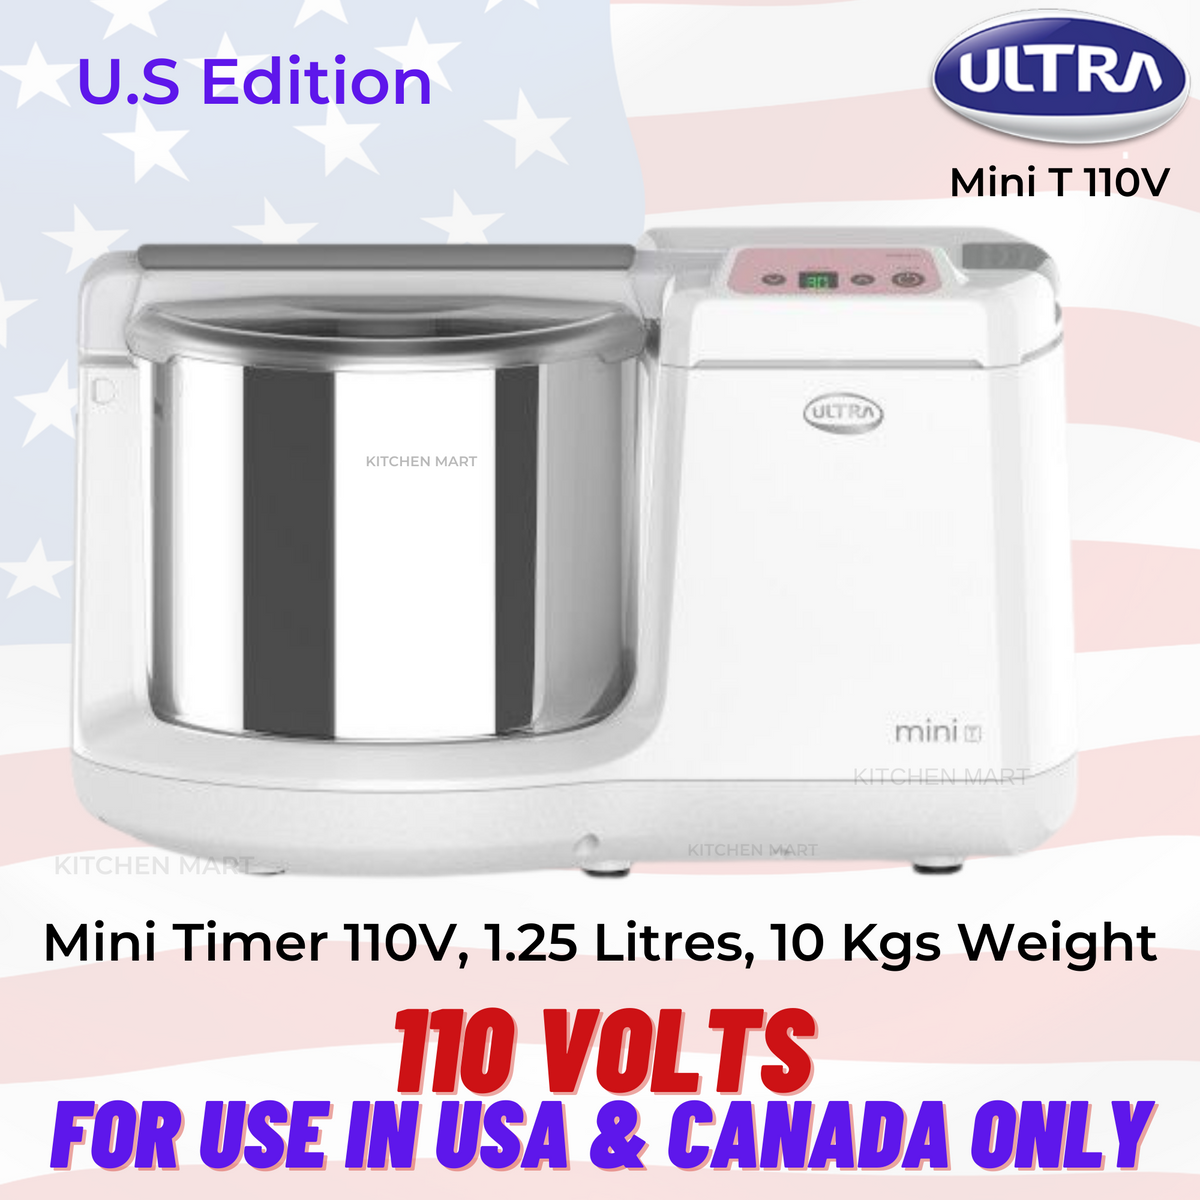 Elgi Ultra Wet Grinder Mini T with timer, 1.25 Litres, 110 Volts for use in USA &amp; Canada only